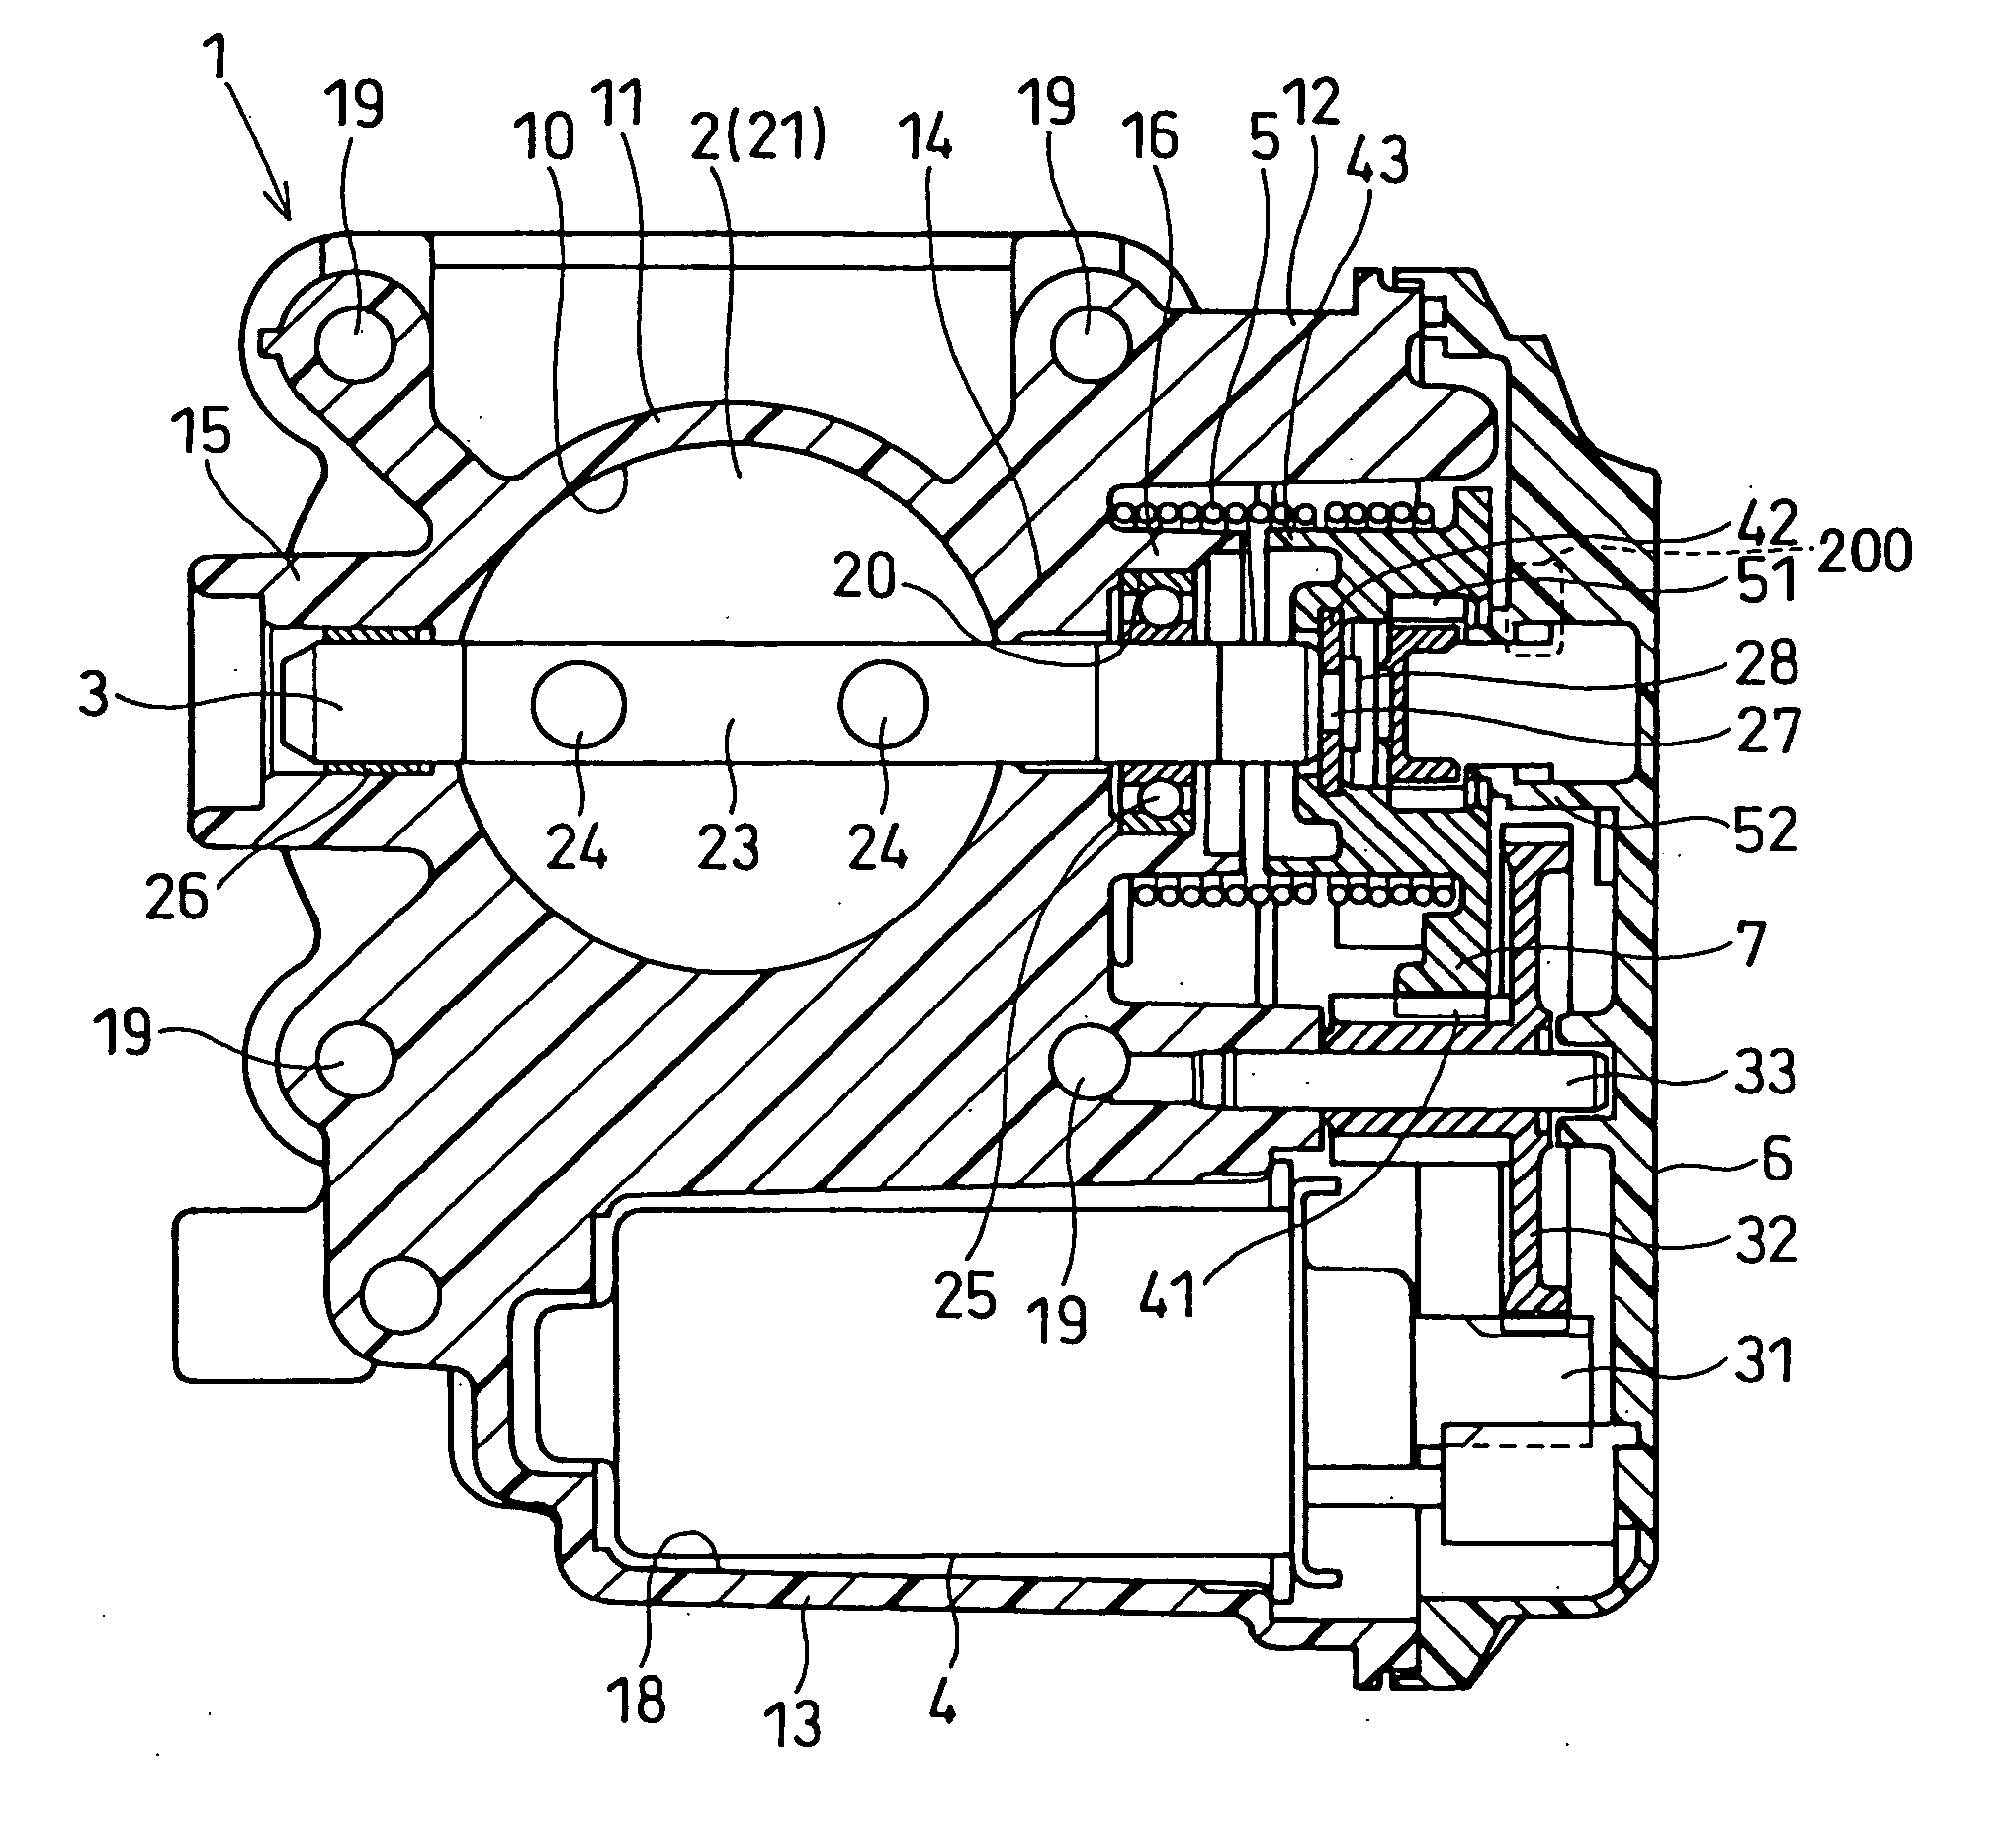 Intake control device for internal combustion engine